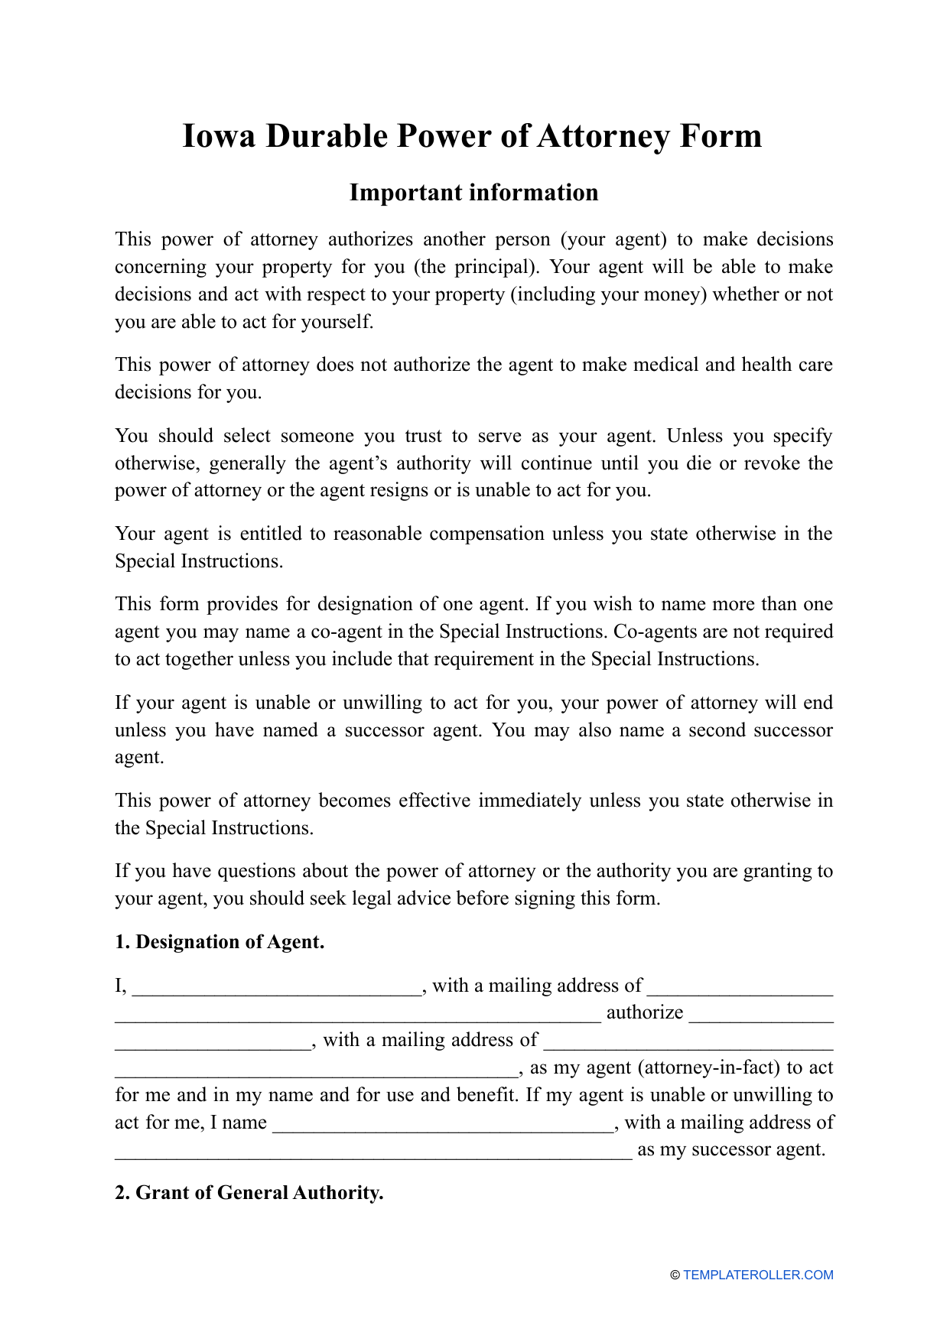 Durable Power of Attorney Form - Iowa, Page 1